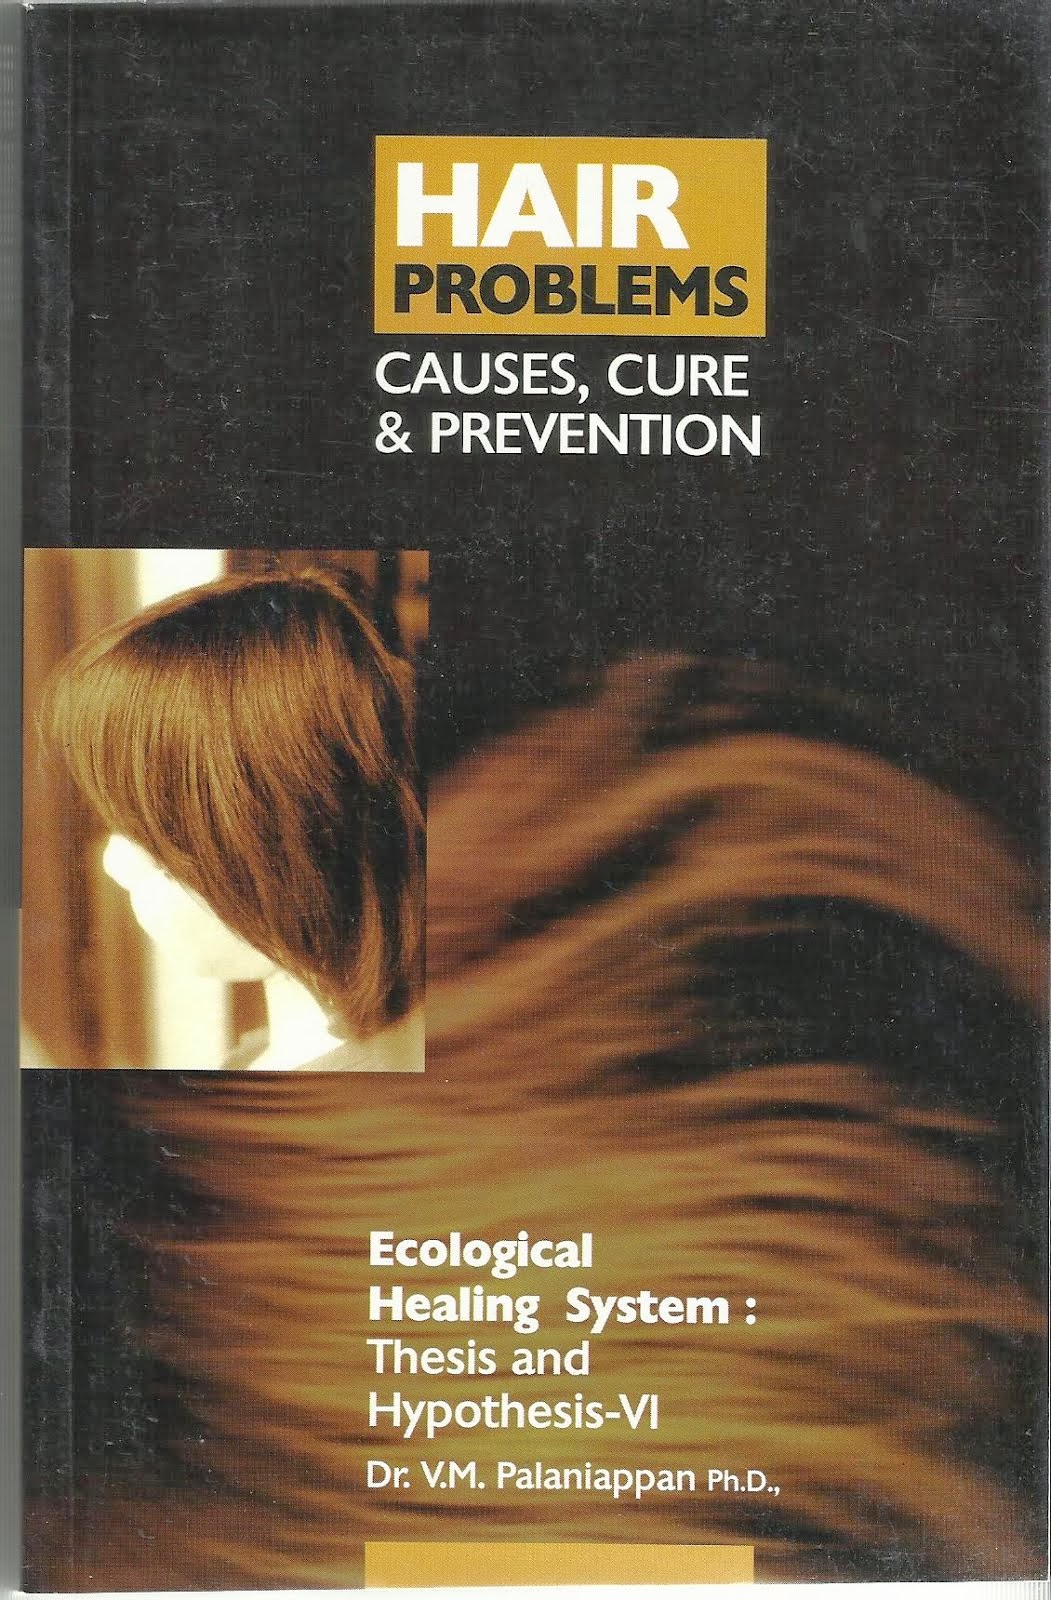 HAIR PROBLEMS: CAUSES, CURE & PREVENTION